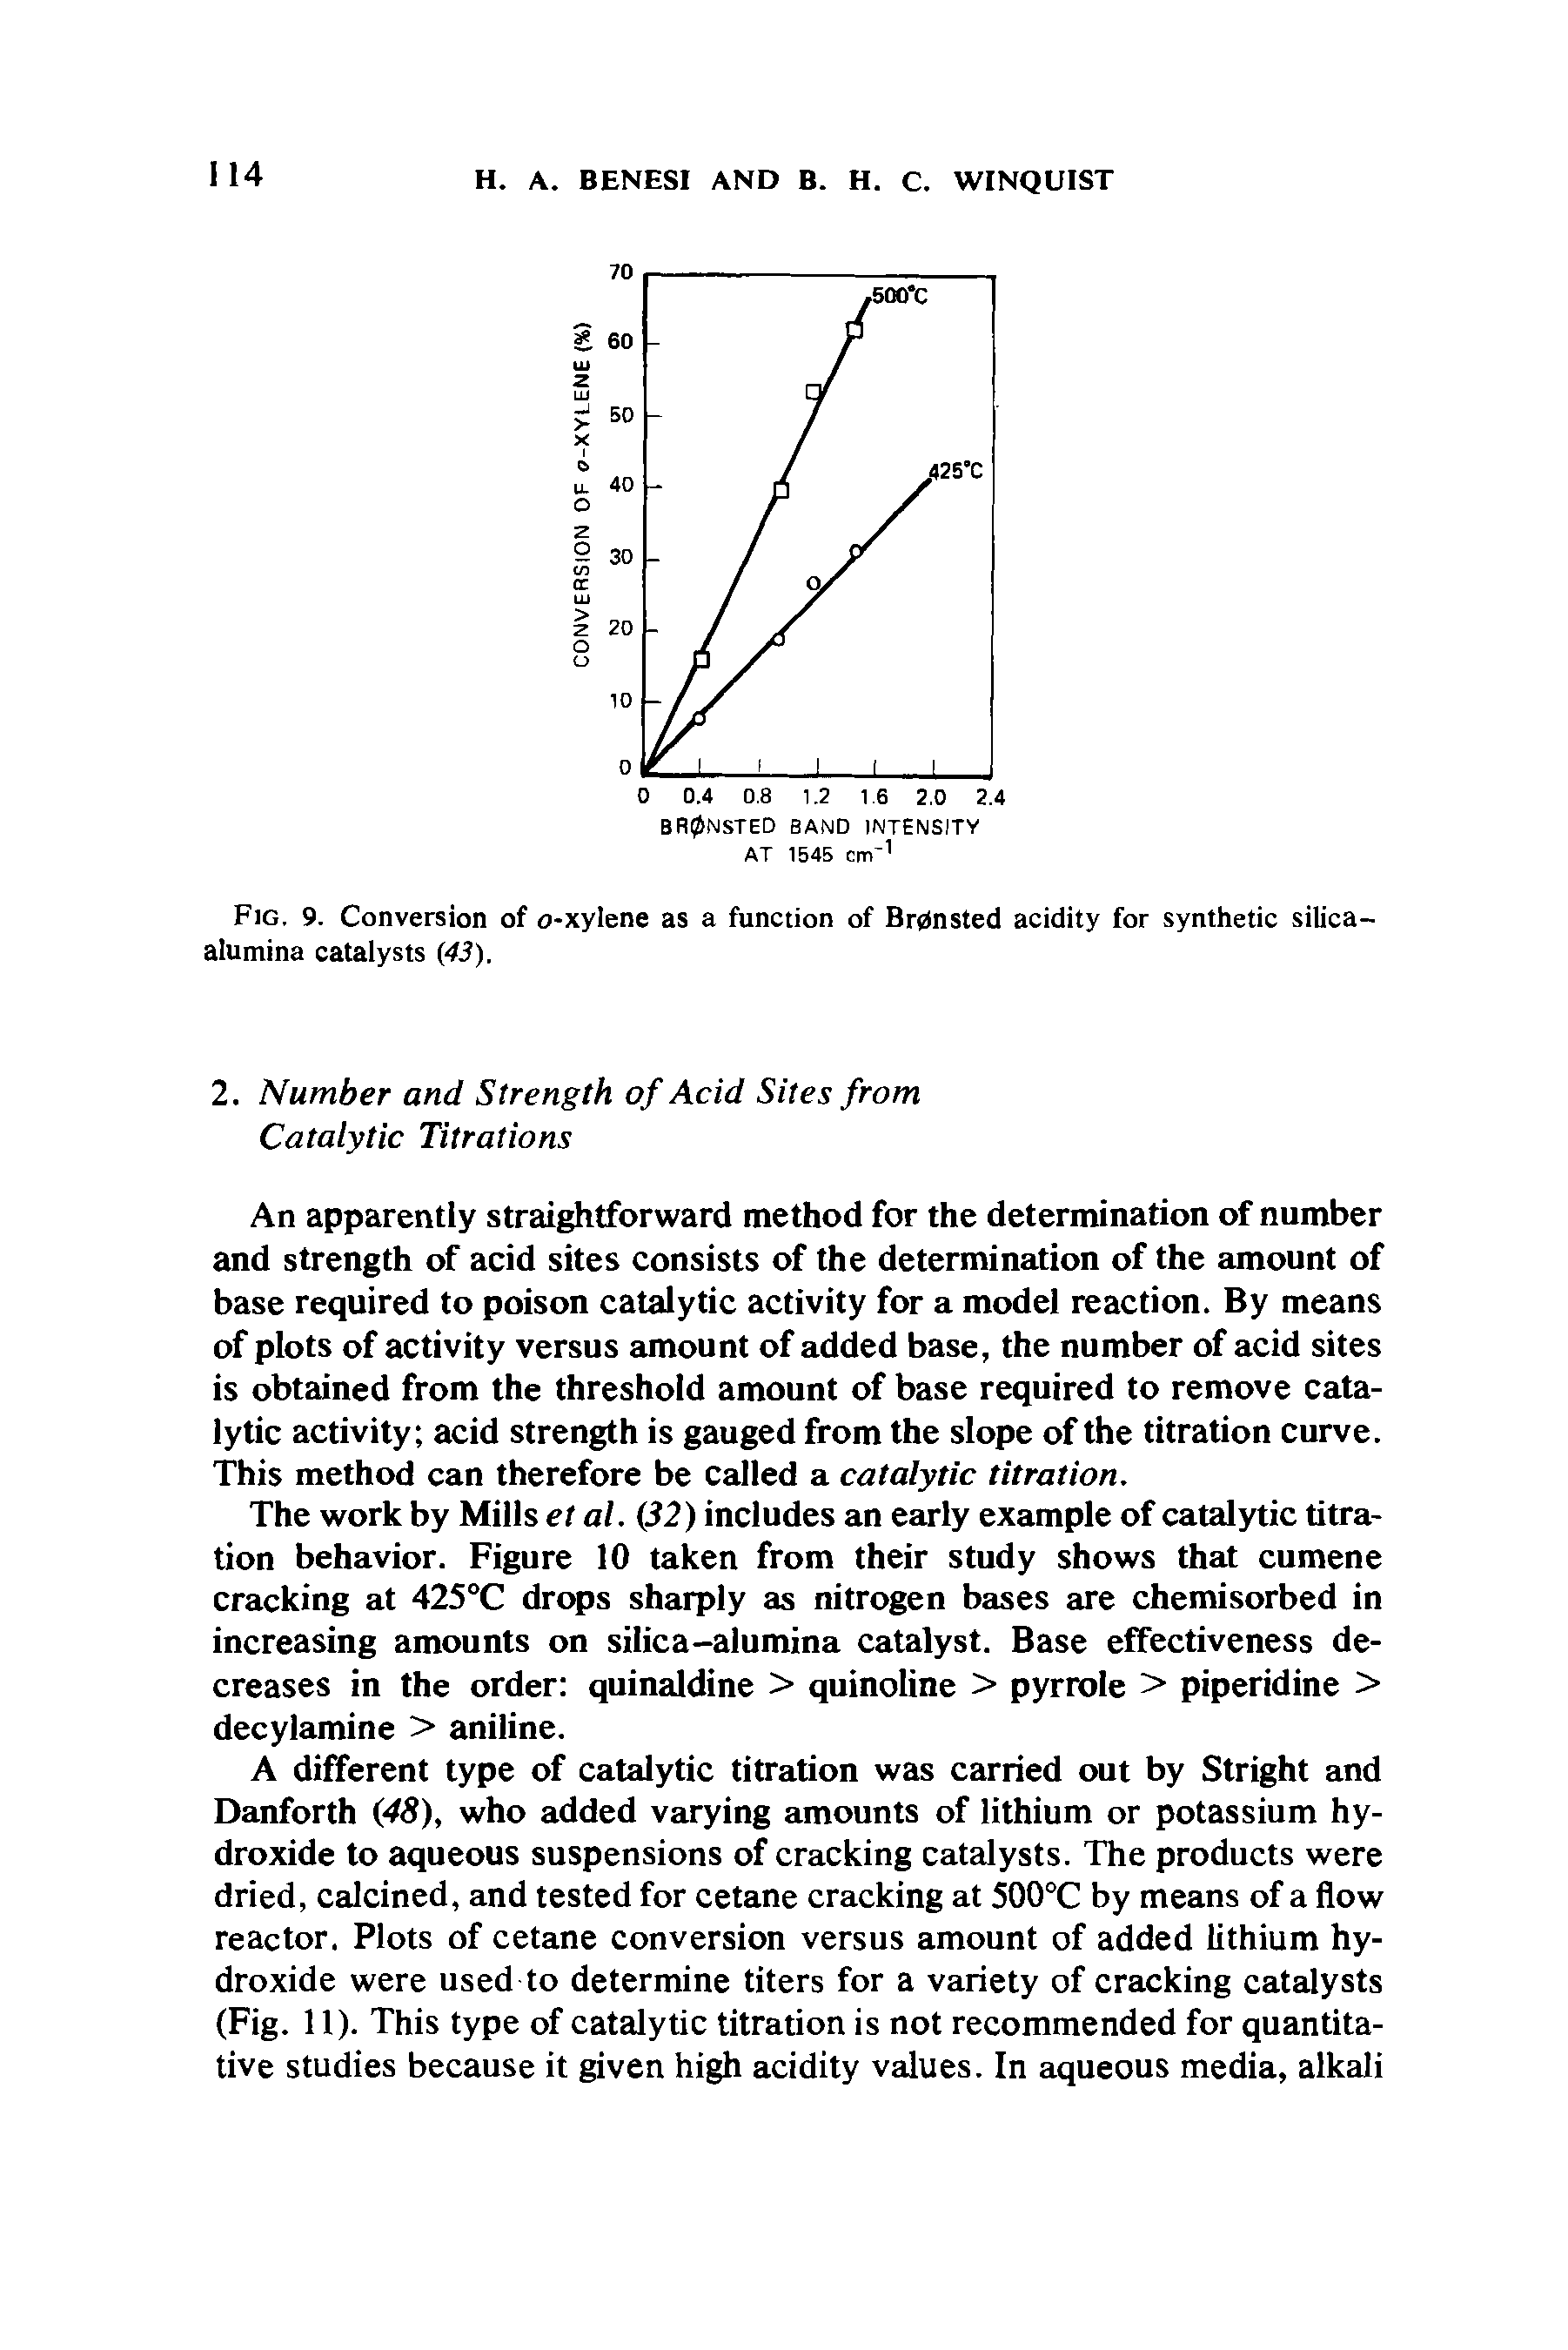 Fig. 9. Conversion of o-xylene as a function of Br0nsted acidity for synthetic silica-alumina catalysts (43).